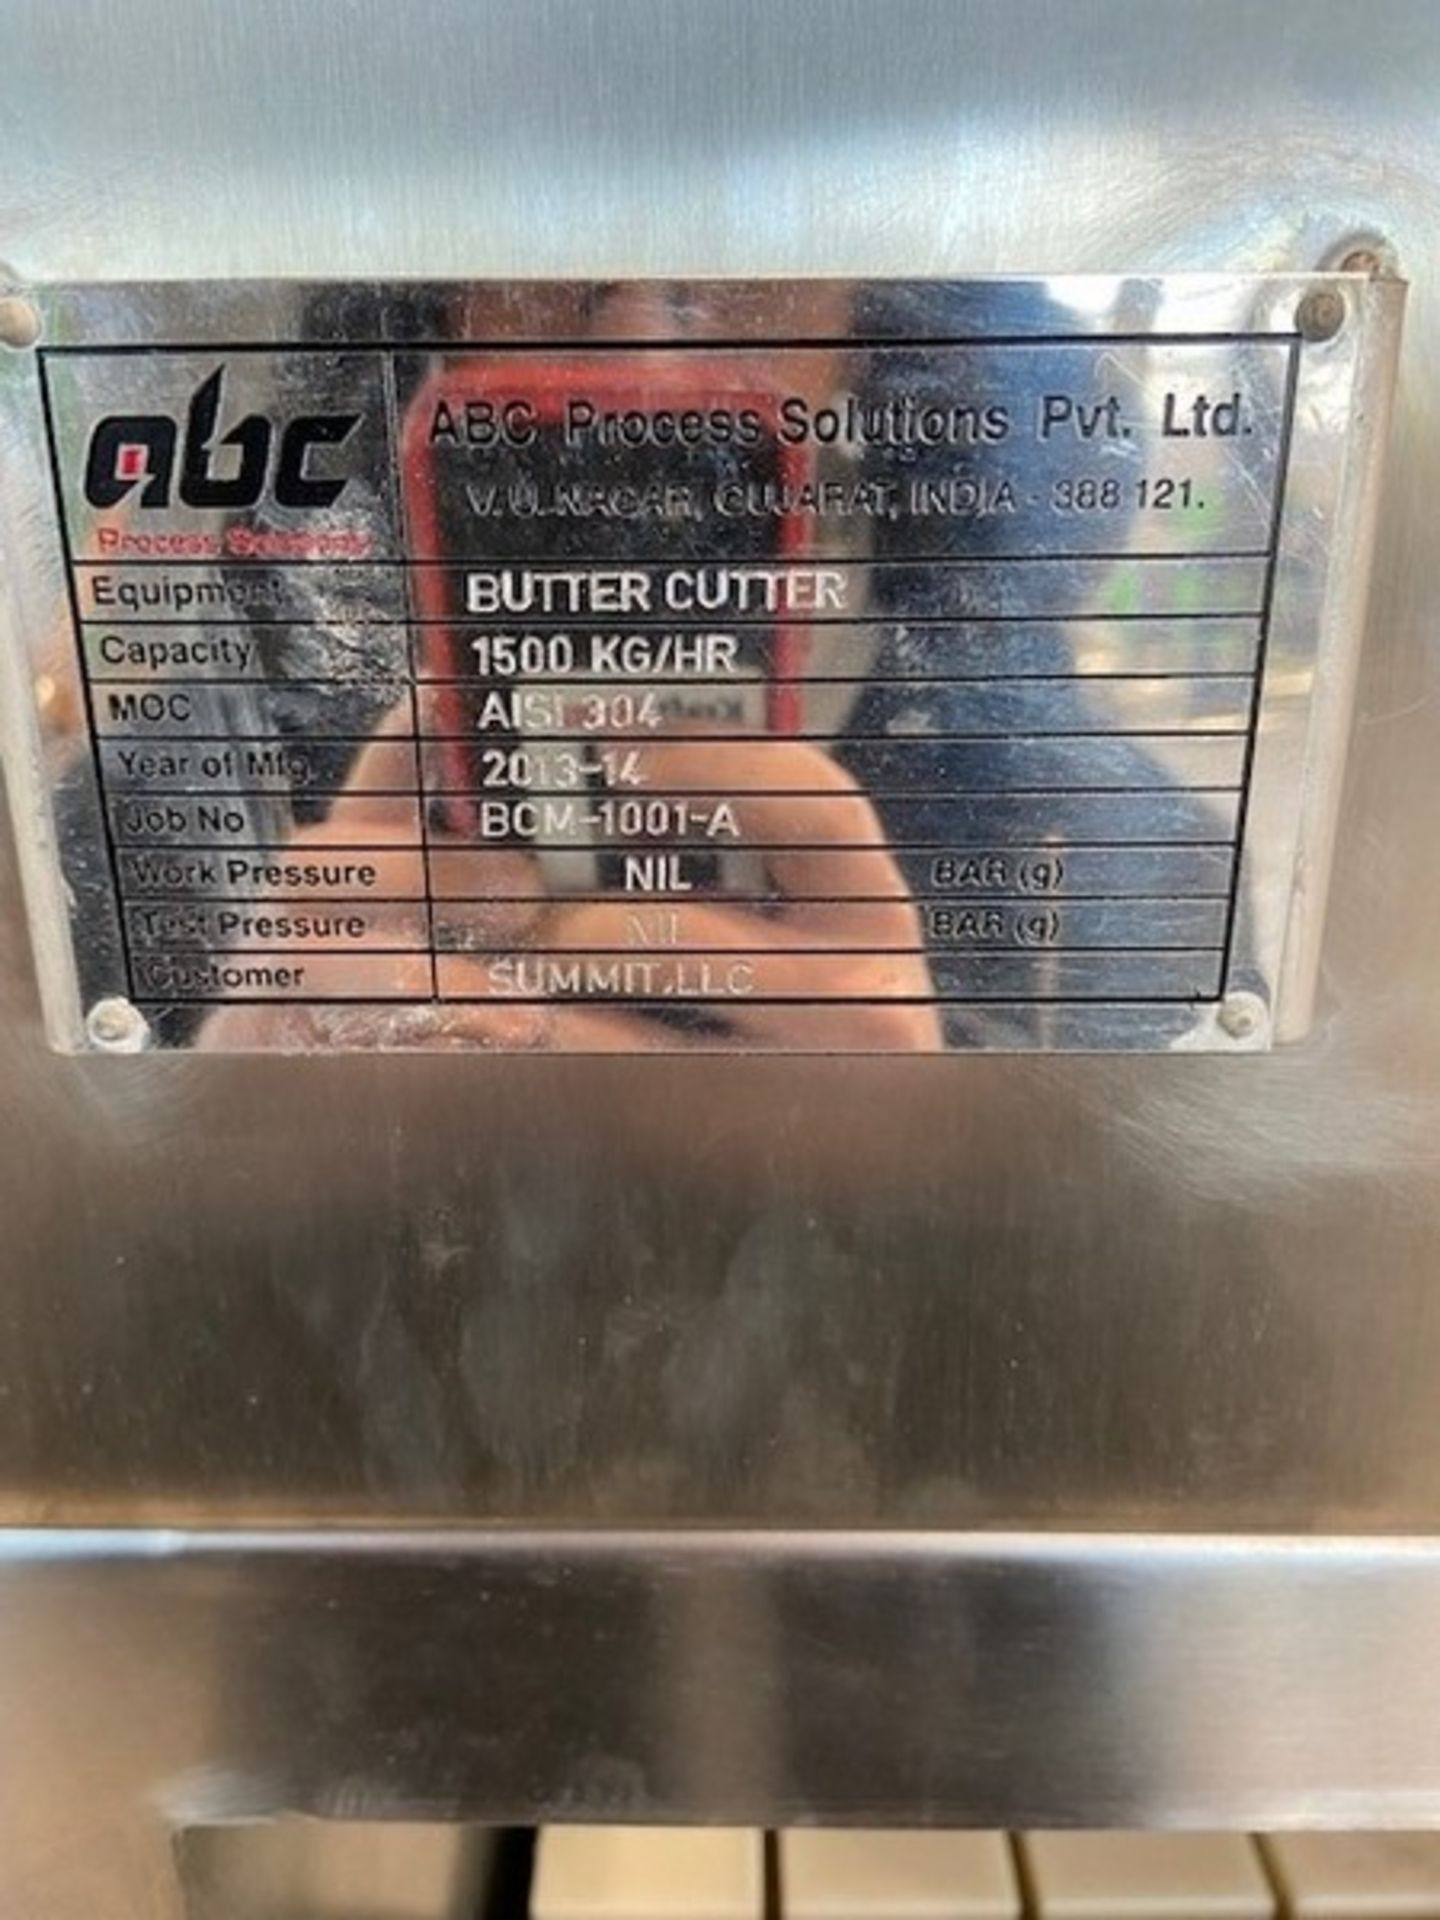 2013/2014 ABC Butter Cutter, 1500 KG/Hr., MOC: AISI304 (INV#80101)(Located @ the MDG Auction - Image 4 of 7